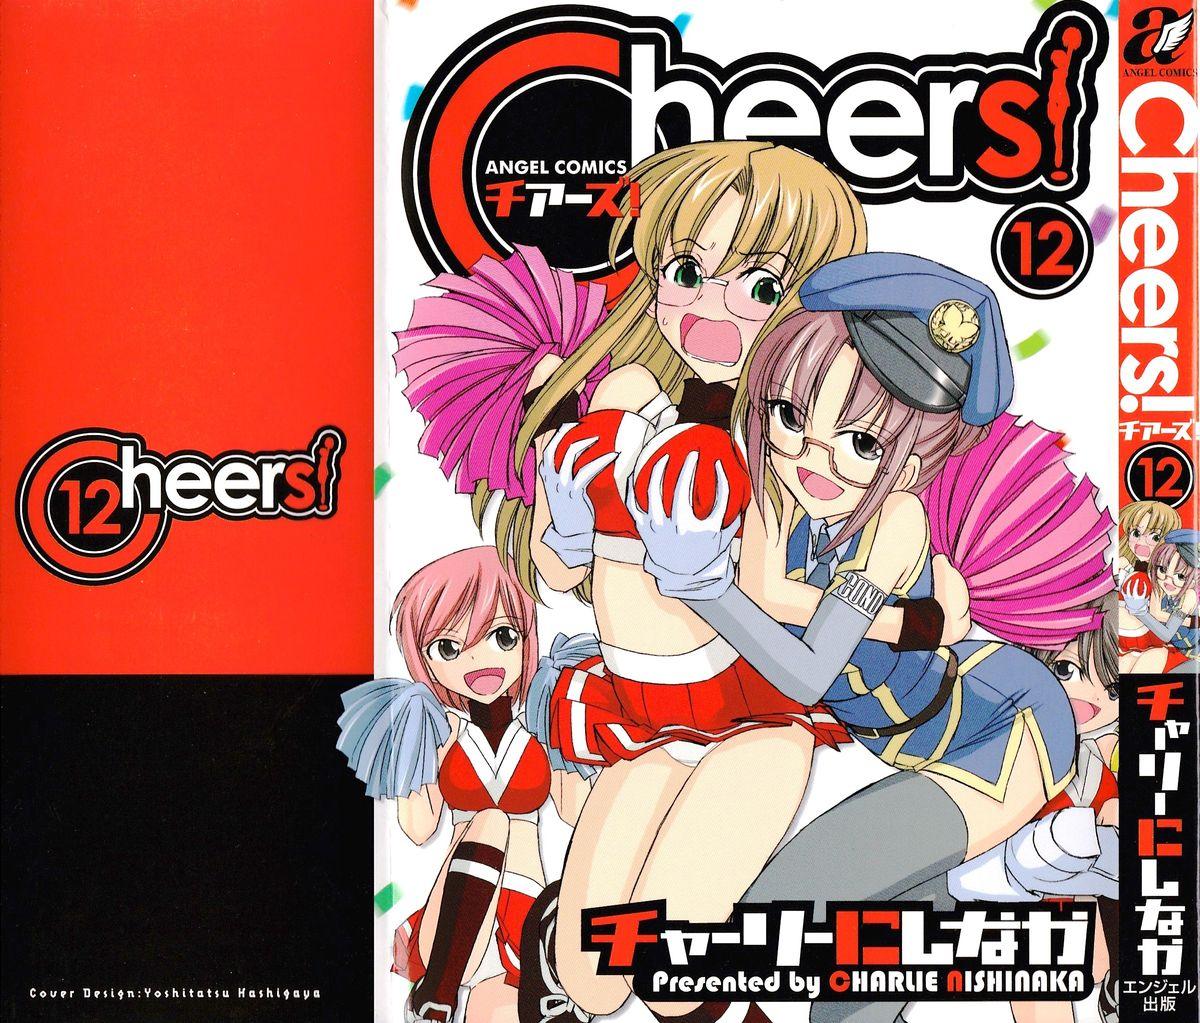 Cheers! 12 Ch. 94-97 1